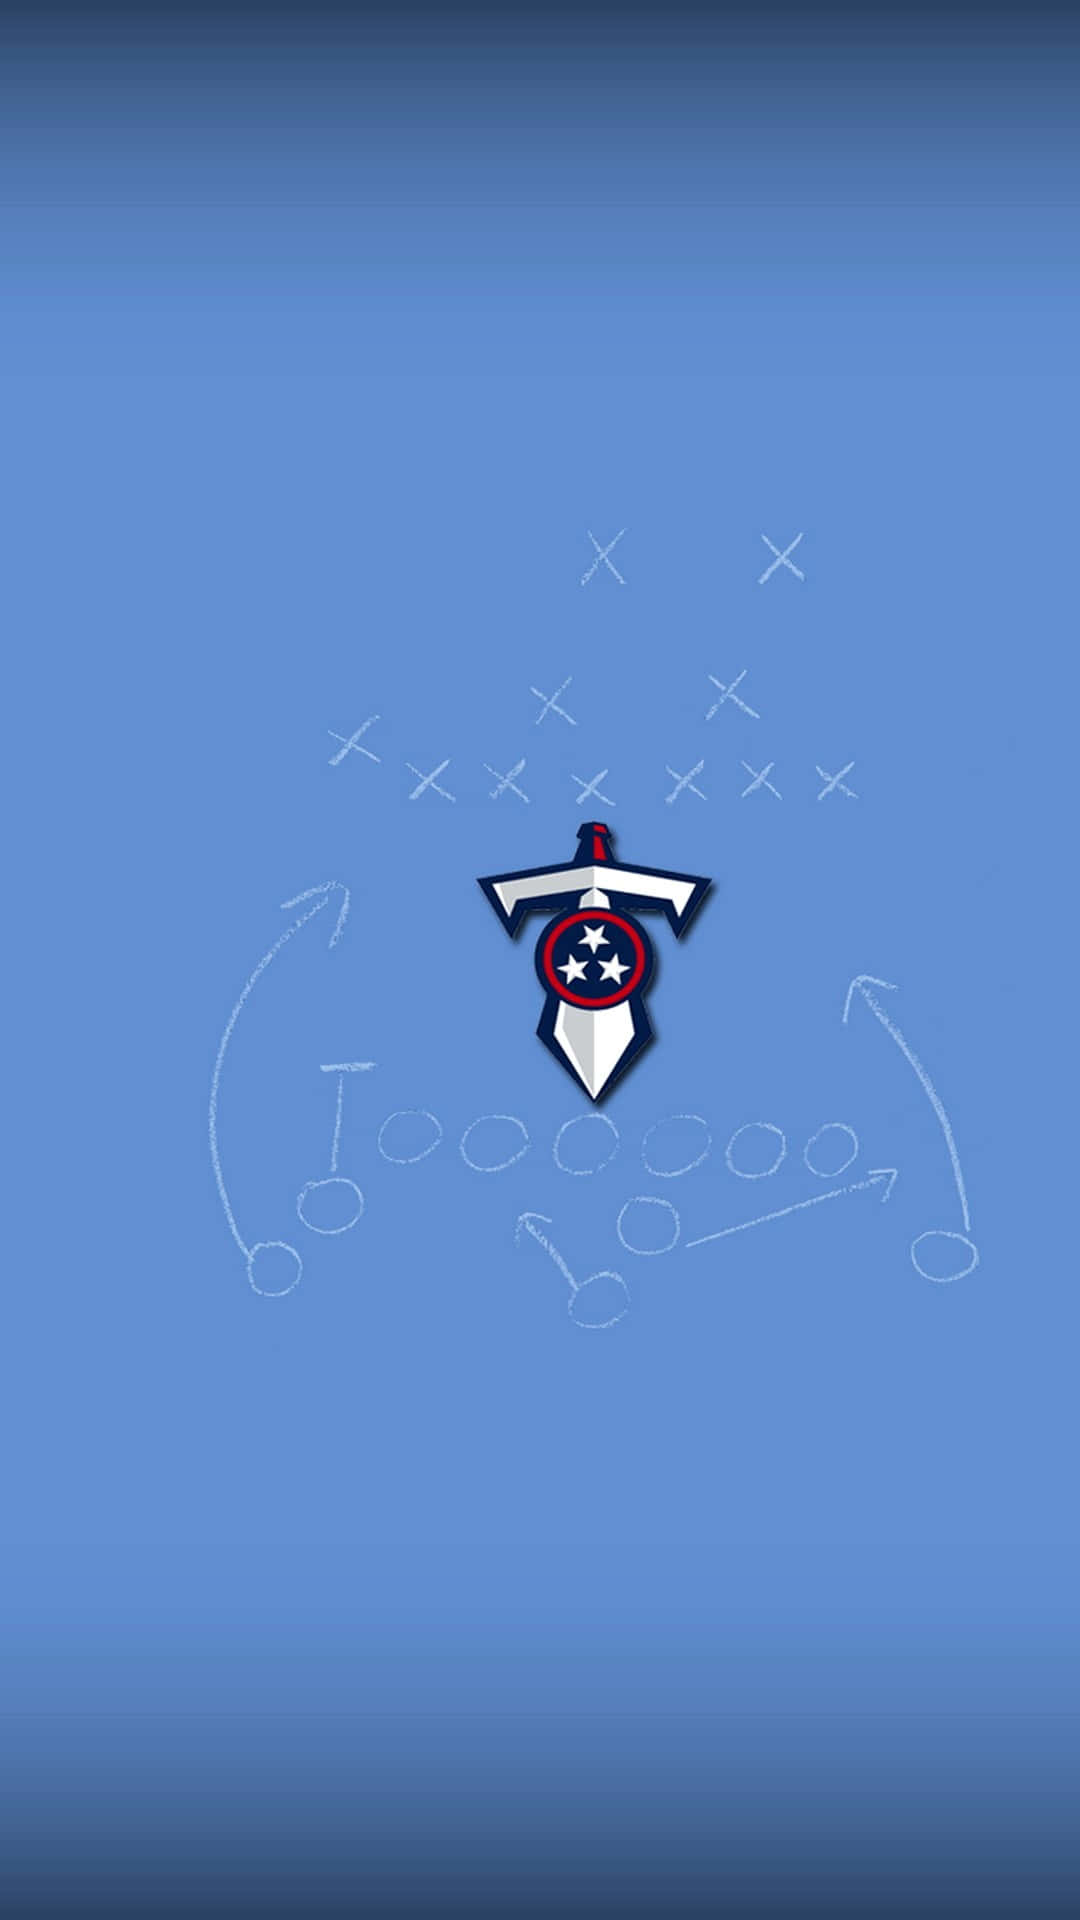 Represent the Tennessee Titans proudly with this official iPhone wallpaper! Wallpaper